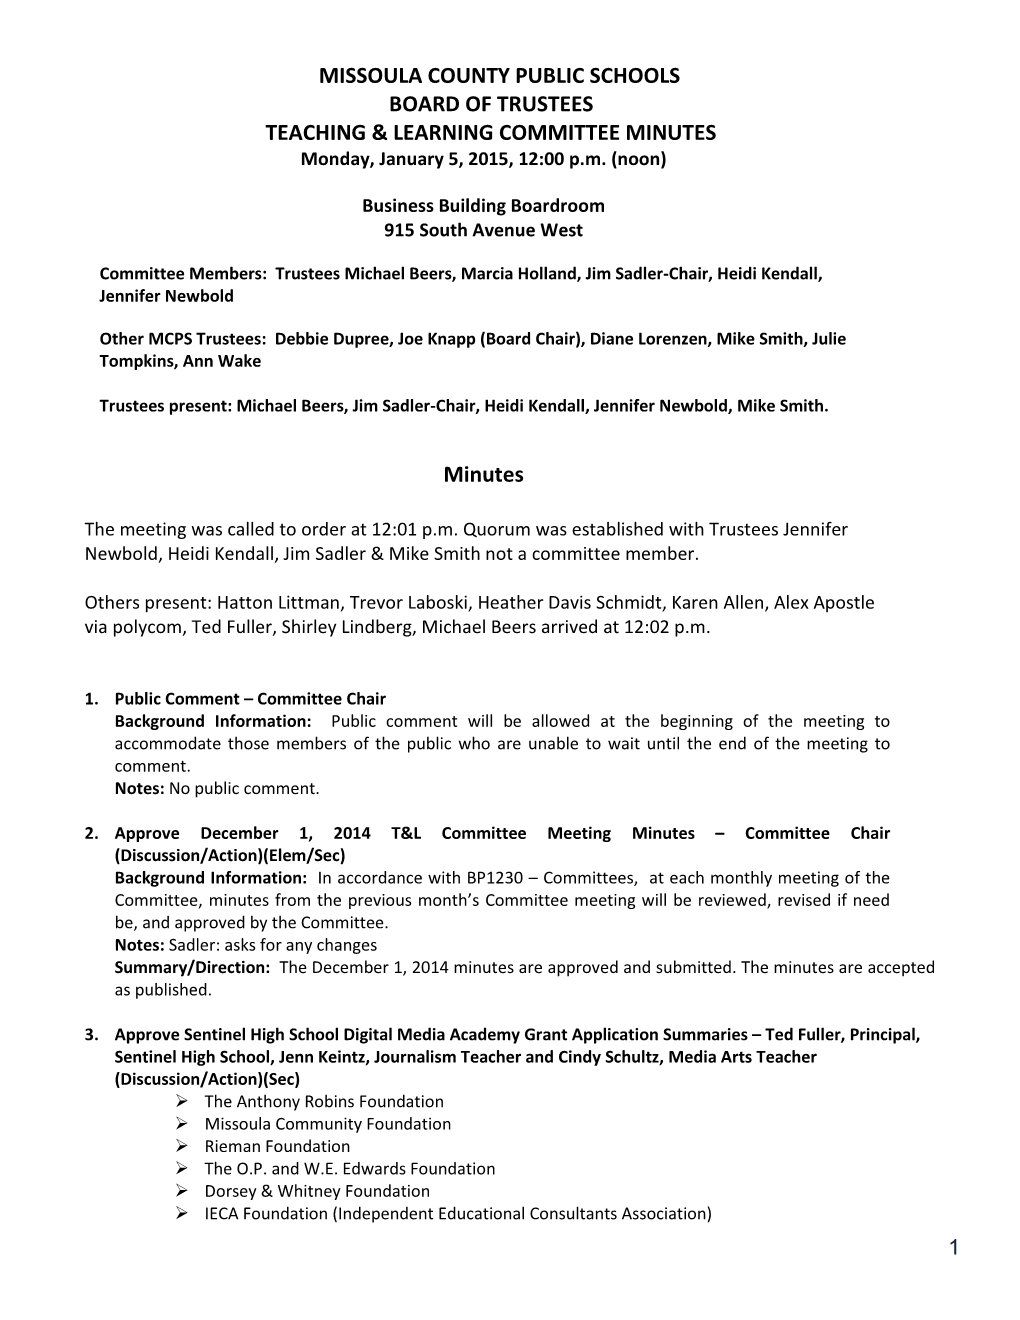 MISSOULA COUNTY PUBLIC SCHOOLS BOARD of TRUSTEES TEACHING & LEARNING COMMITTEE MINUTES Monday, January 5, 2015, 12:00 P.M